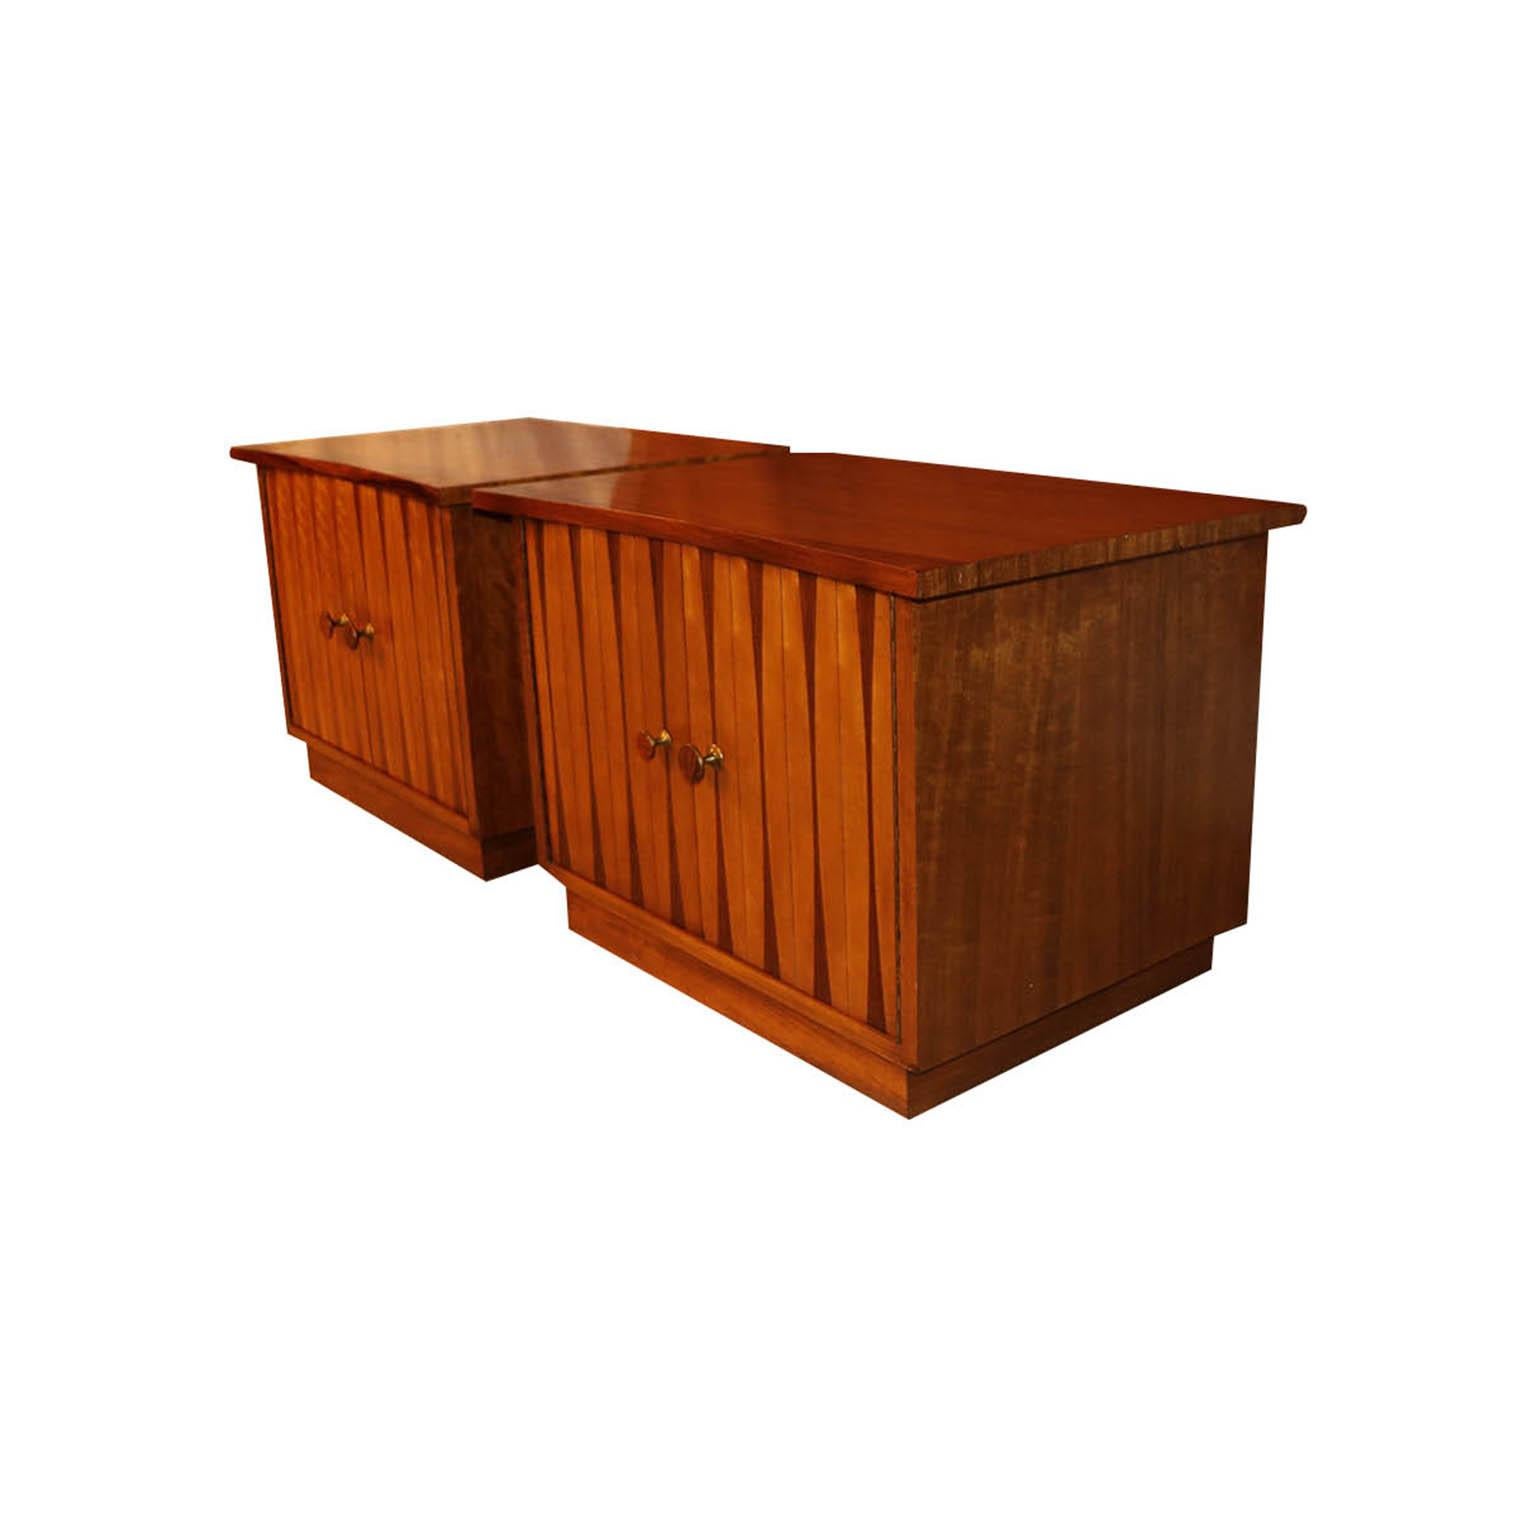 American Midcentury Lane Furniture Nightstands Cabinets Tables